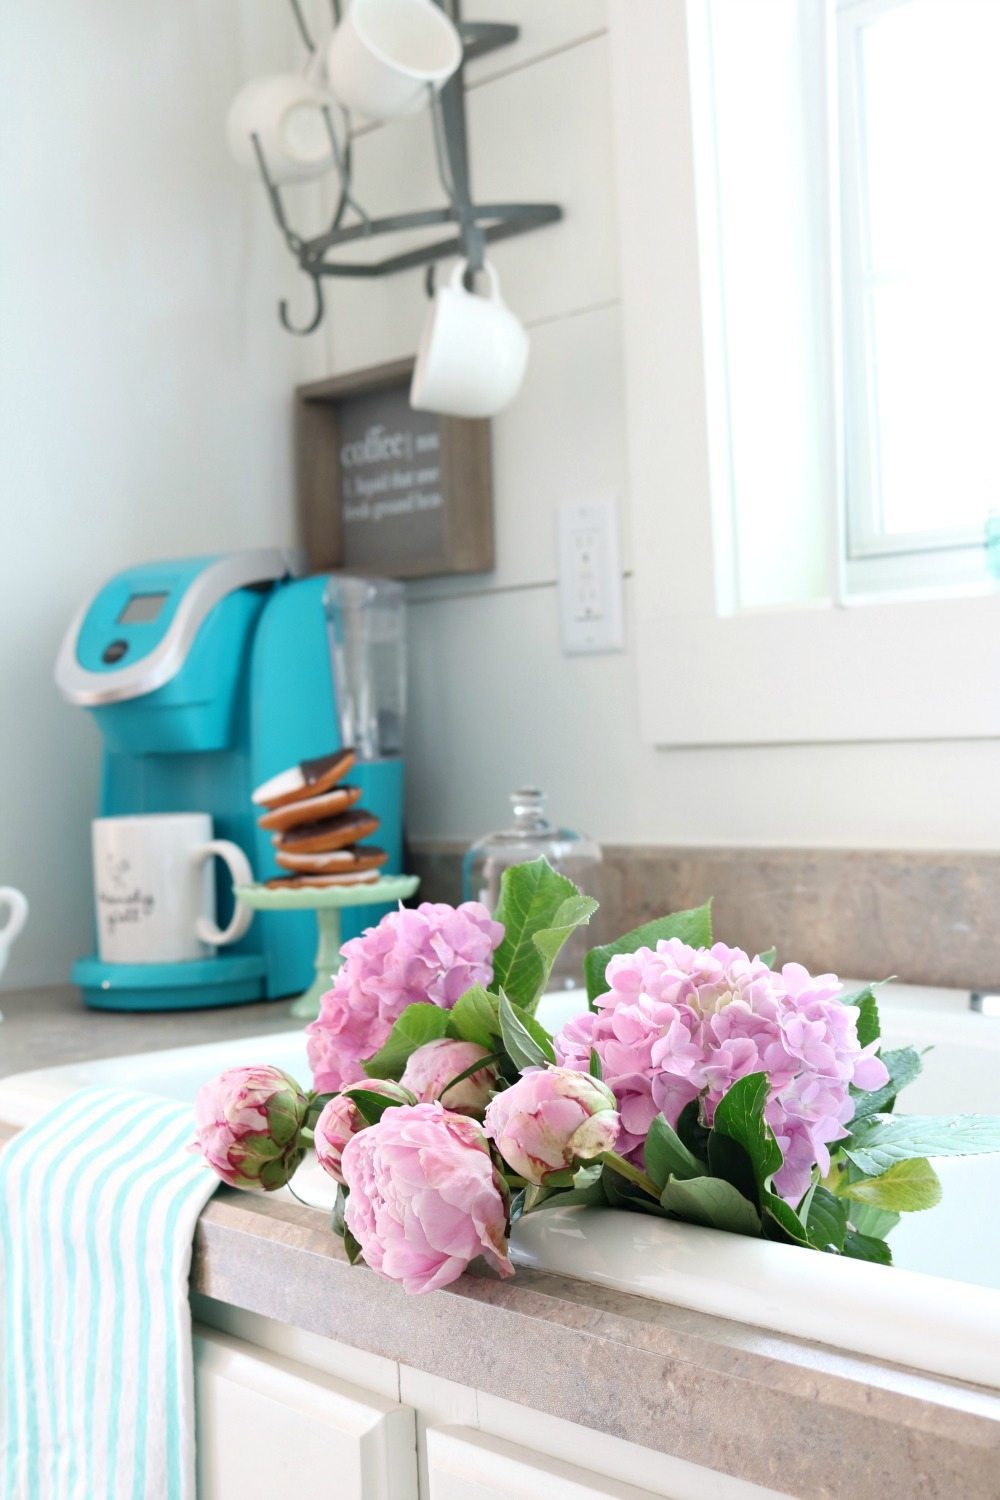 Summer blooms of hydrangeas and peonies add a fresh look to any space